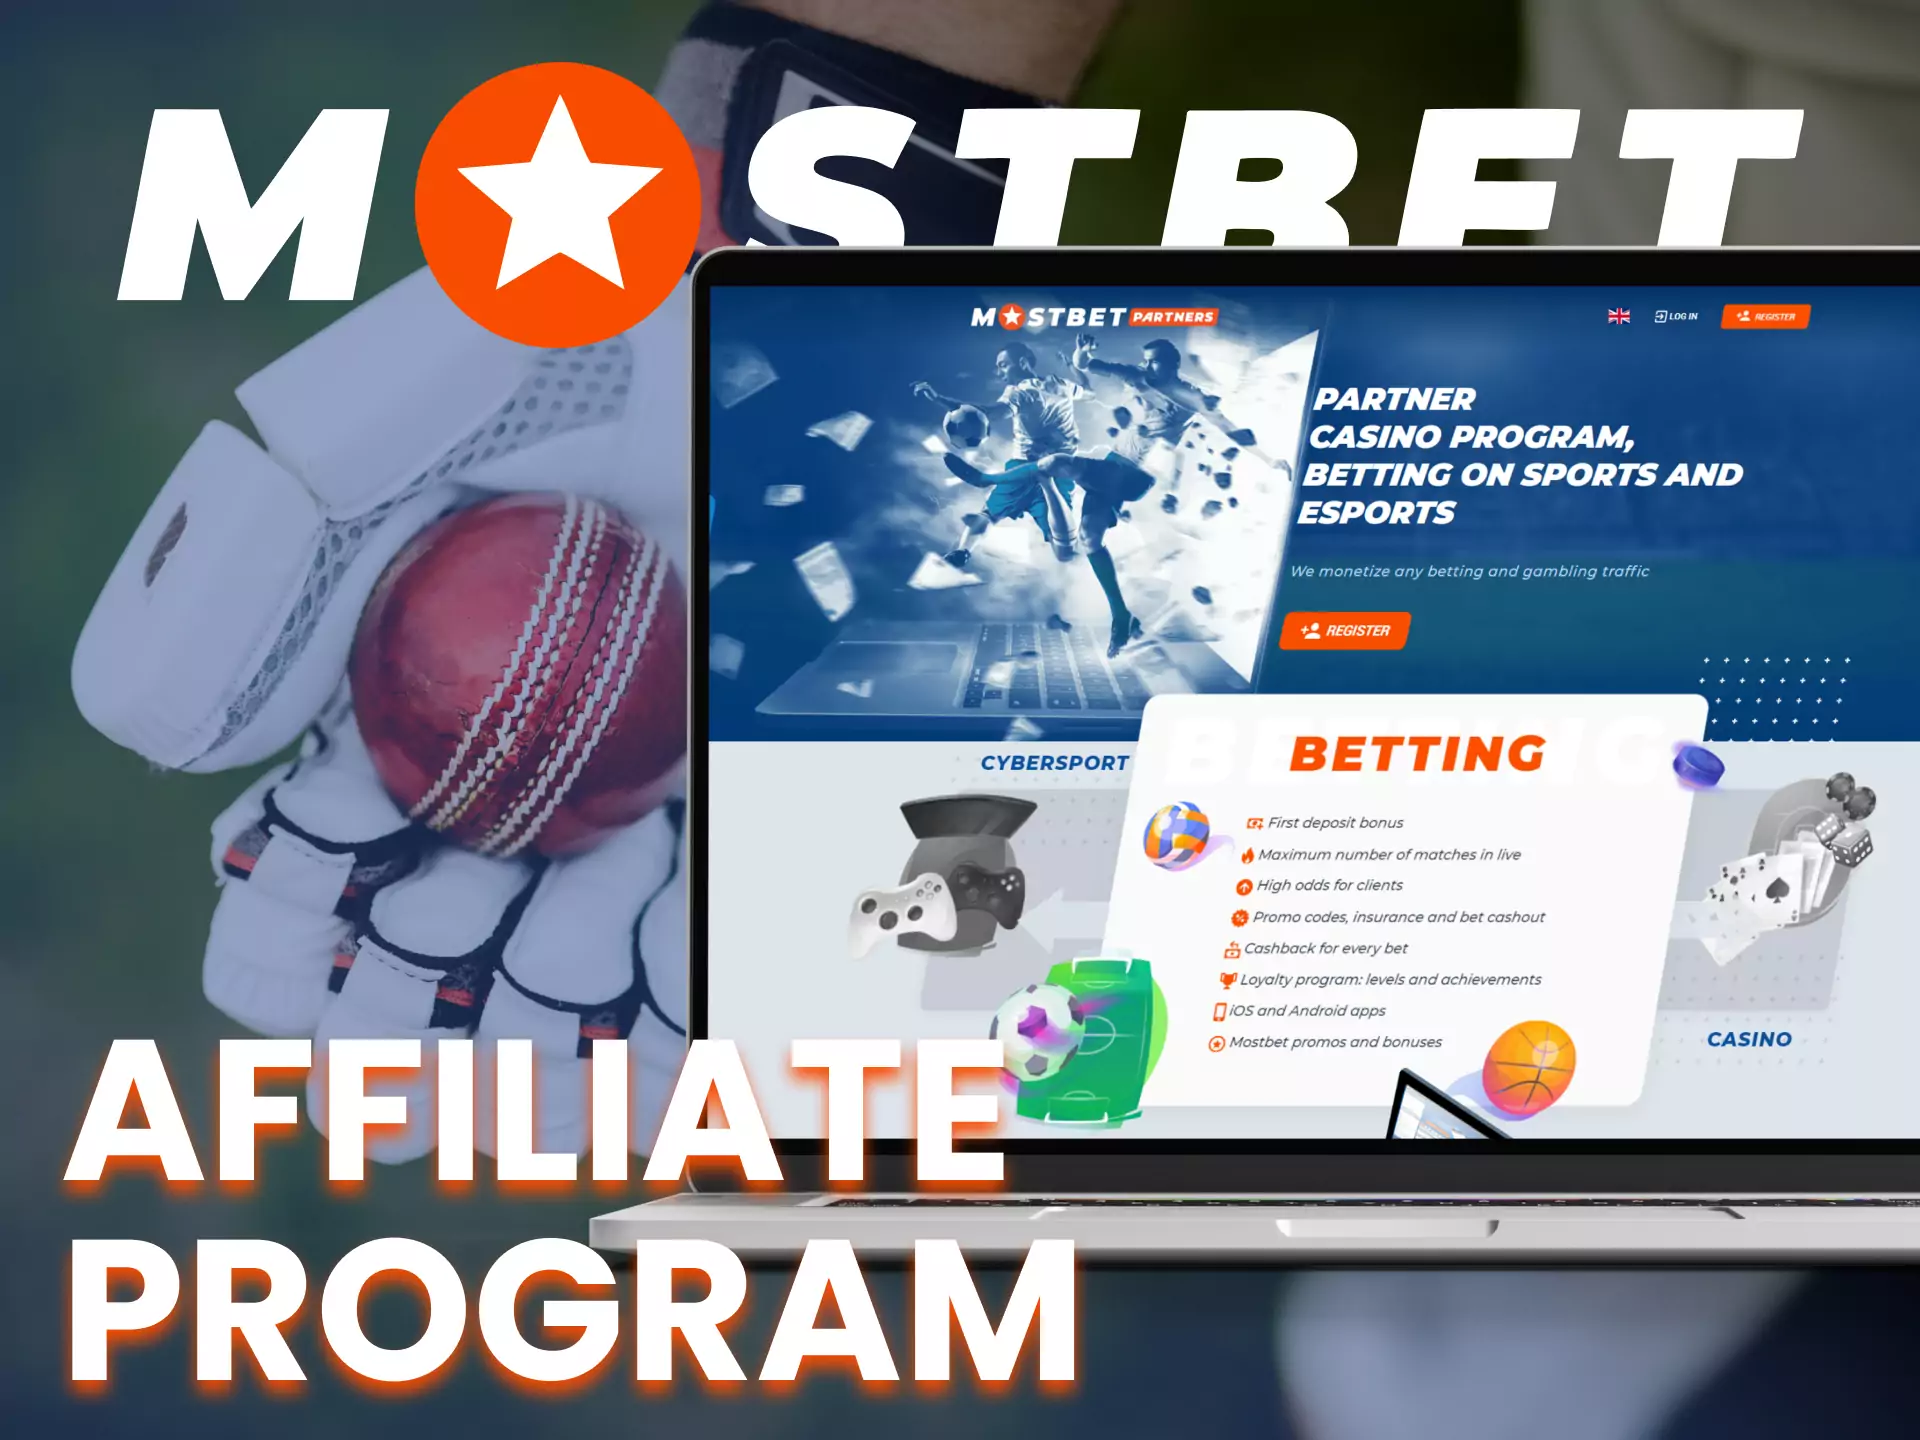 Join the Mostbet affiliate program and get bonuses for inviting new users.